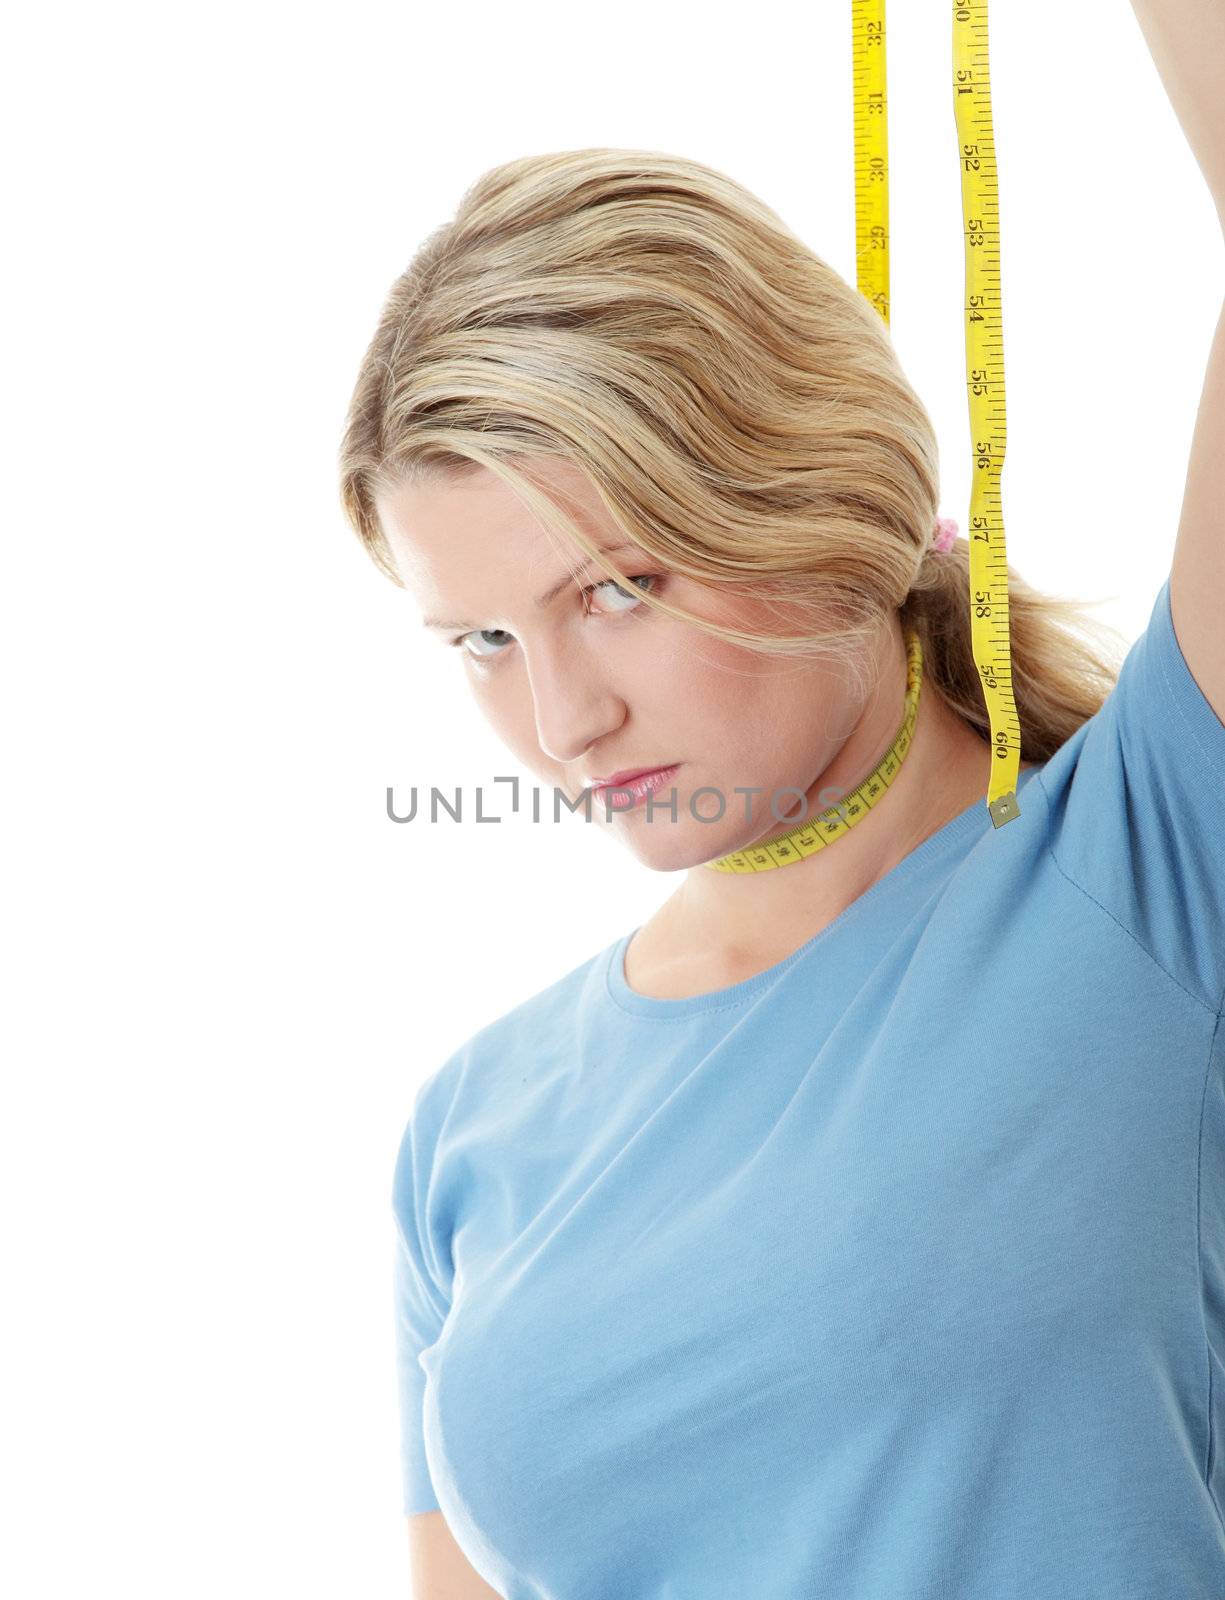 Woman want to hang her self on measuring tape